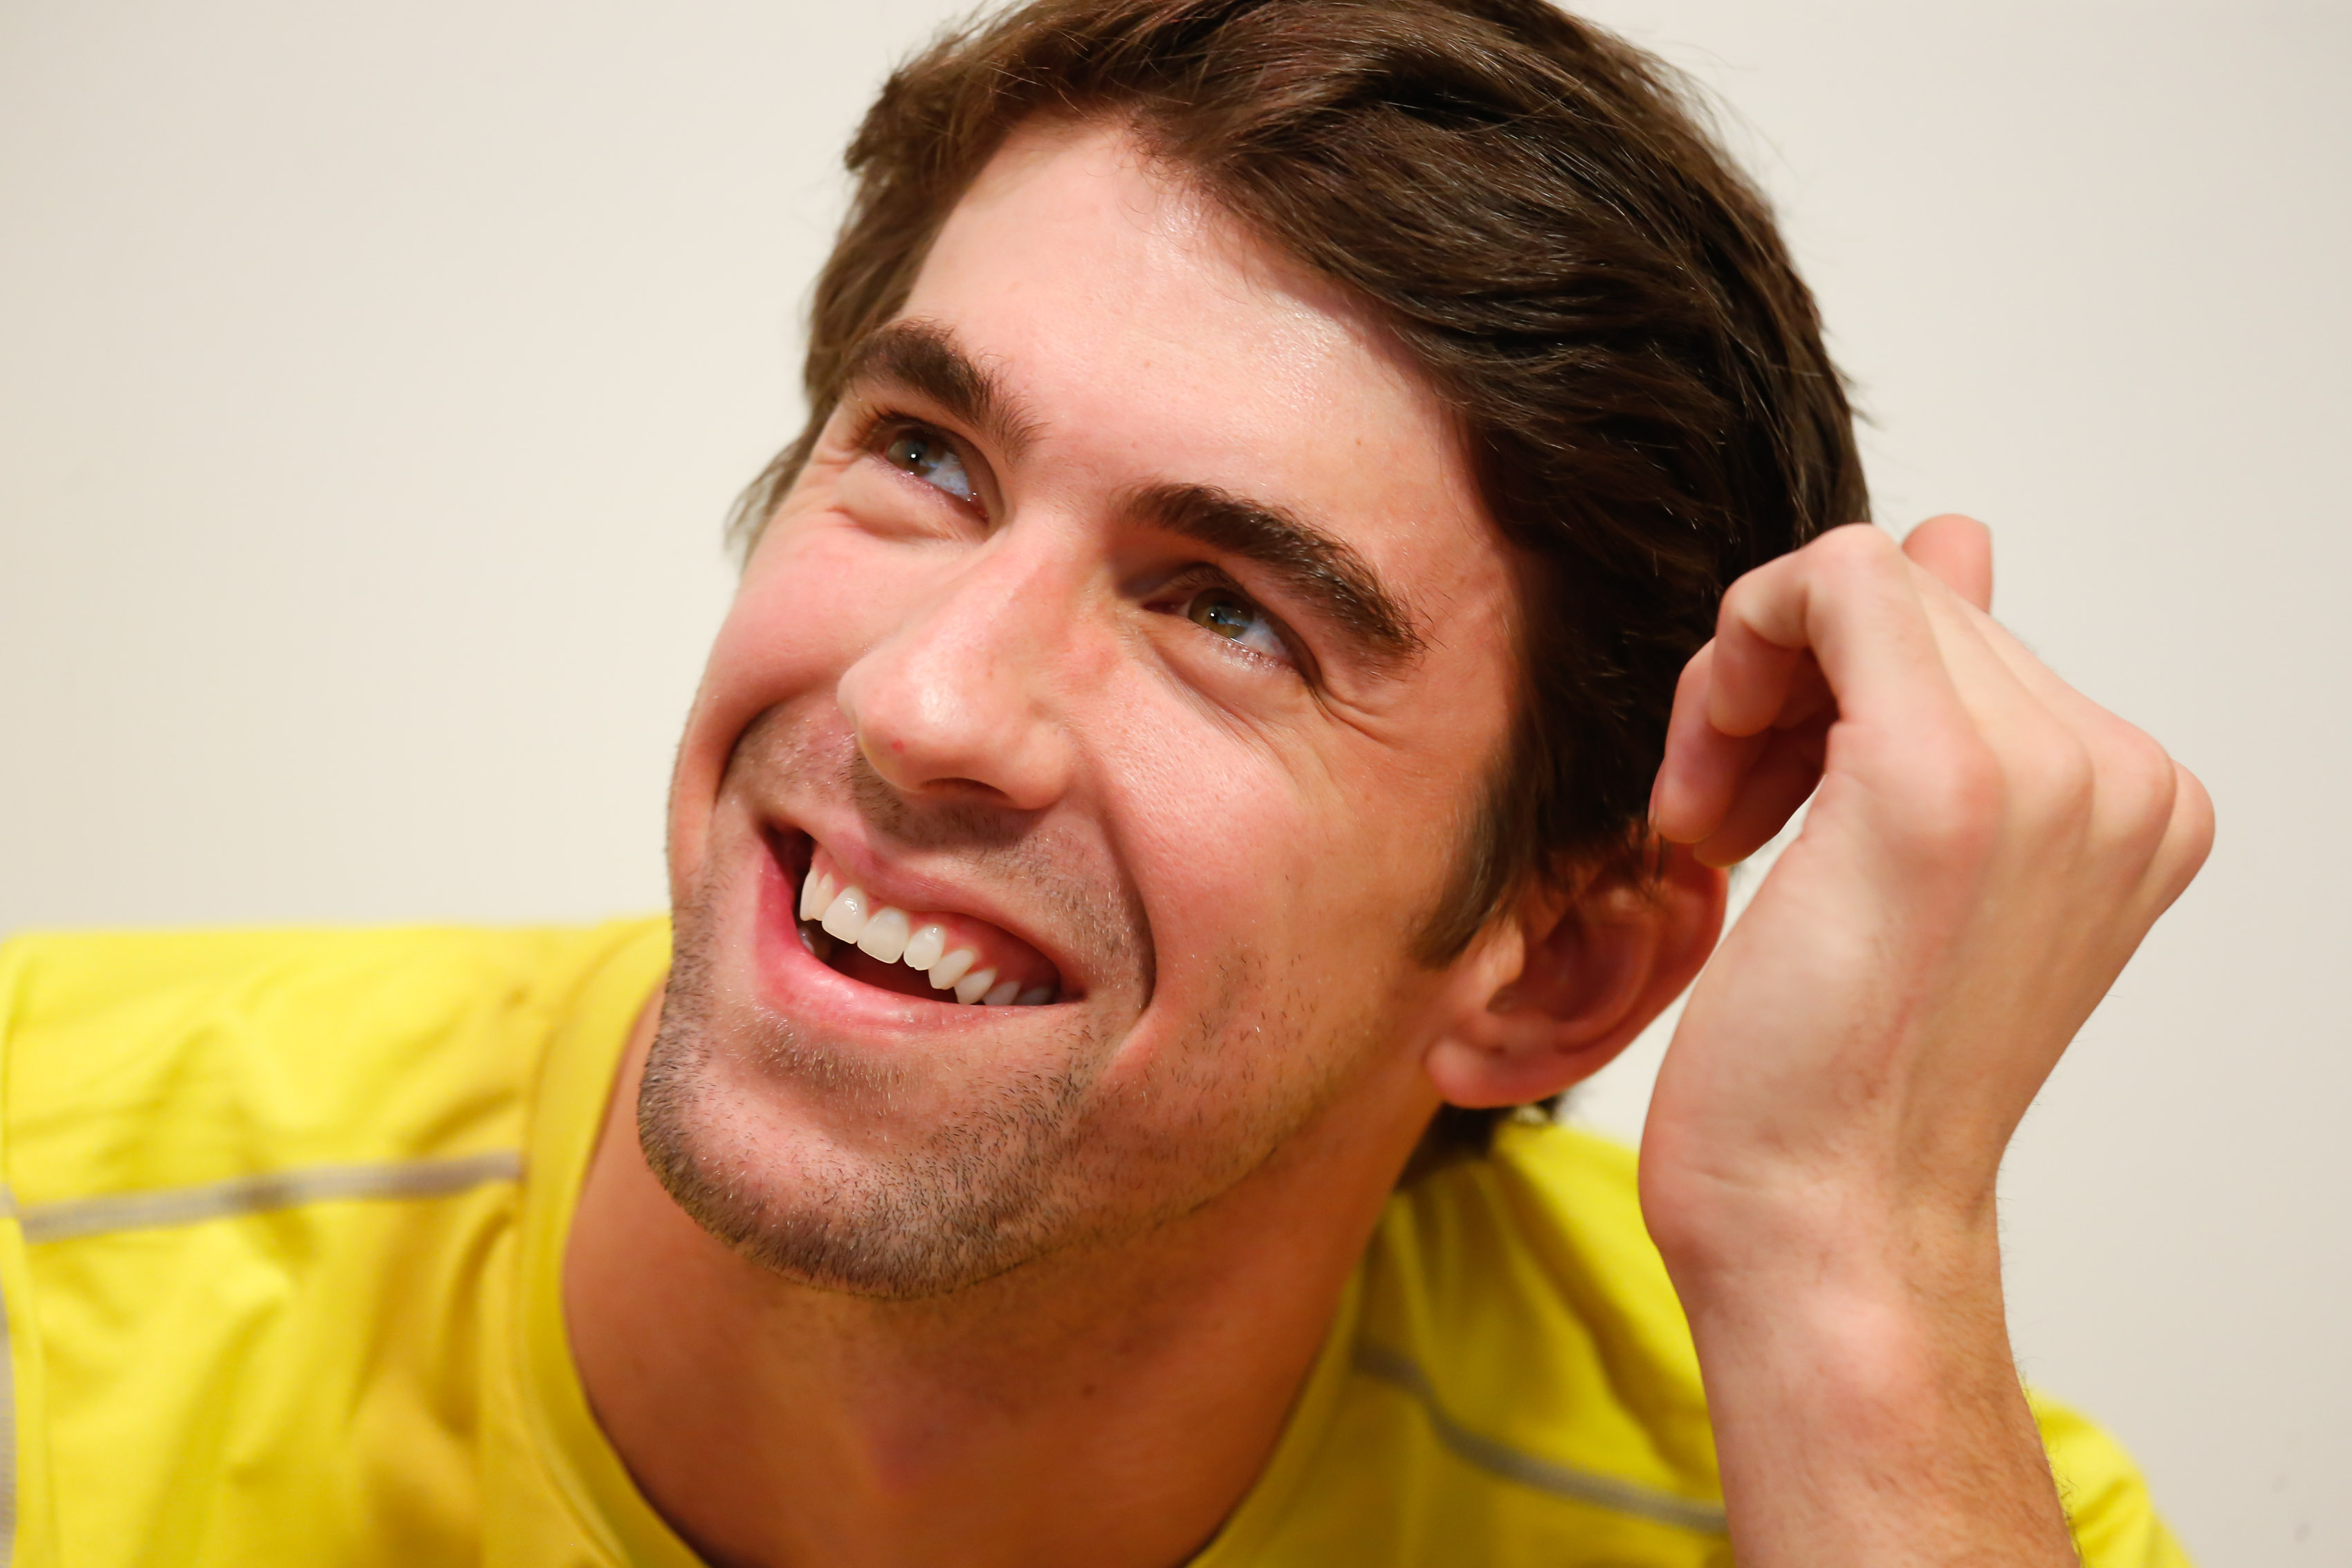 Olympic swimmer Michael Phelps attends a Subway press conference to promote healthy living and lifestyle among childrenon December 04, 2013 in Sao Paulo, Brazil. (Rafael Neddermeyer&mdash;Getty Images)